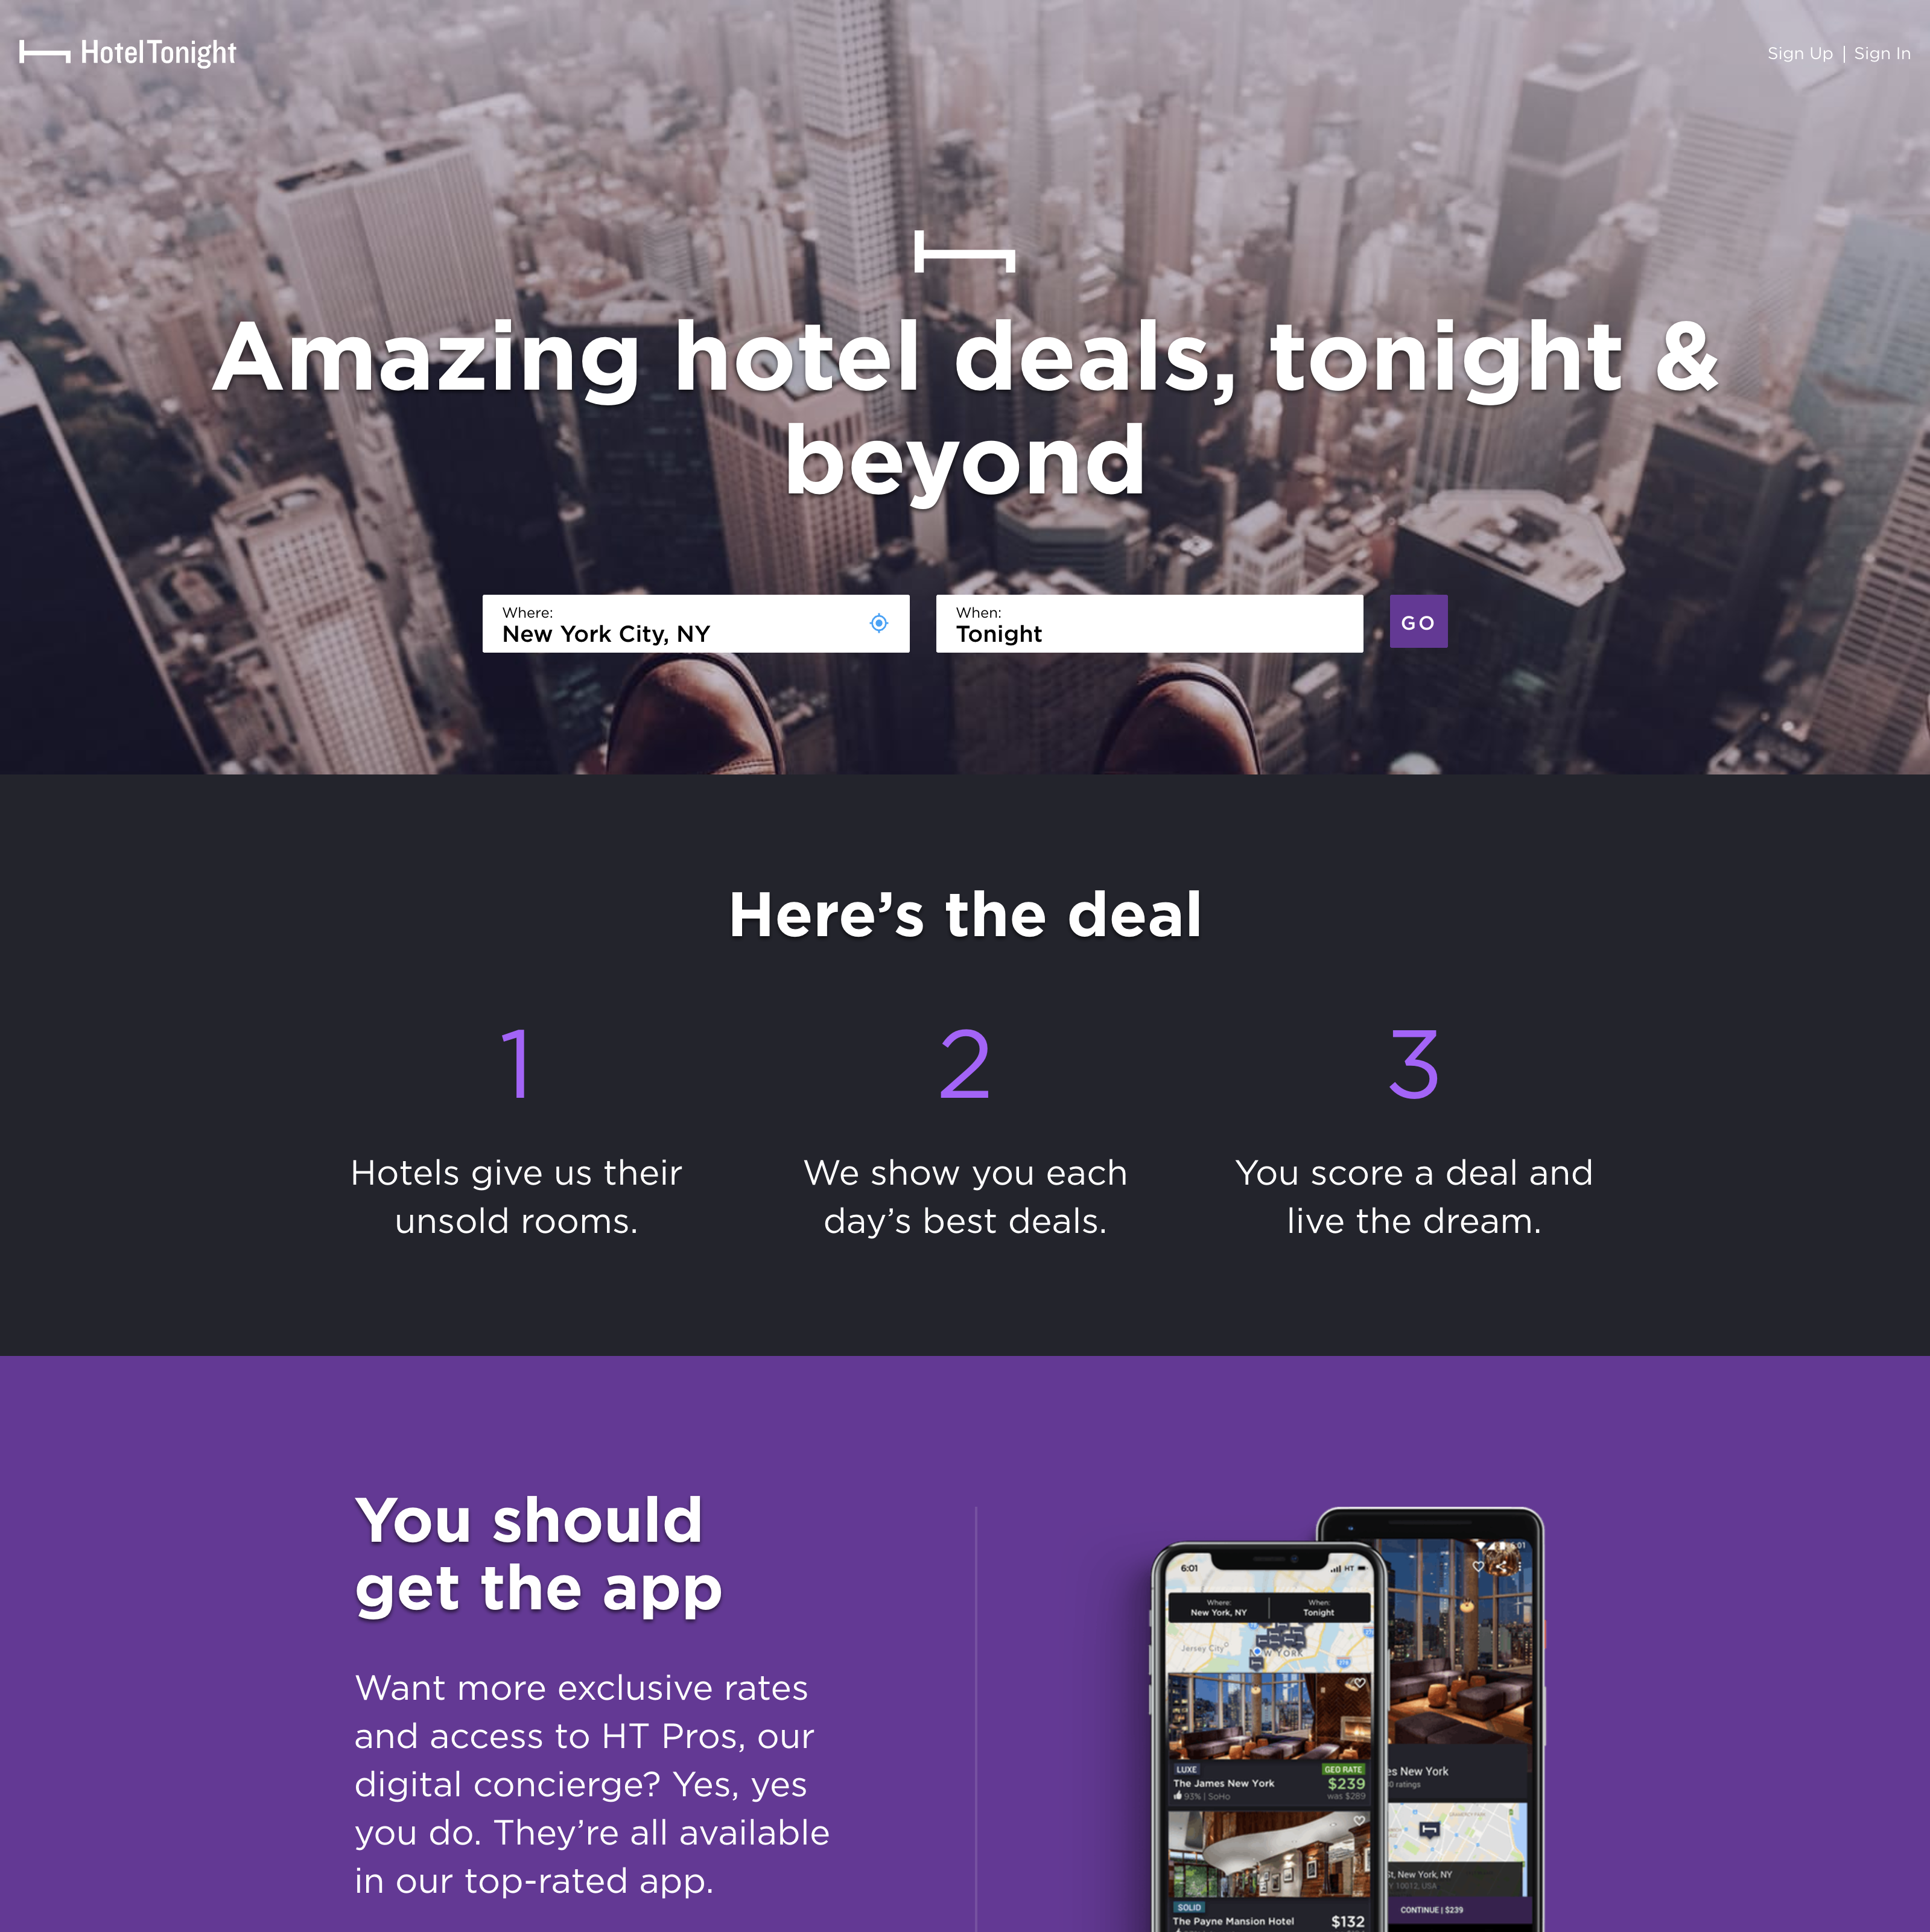 HotelTonight has introduced a desktop version of its mobile app.